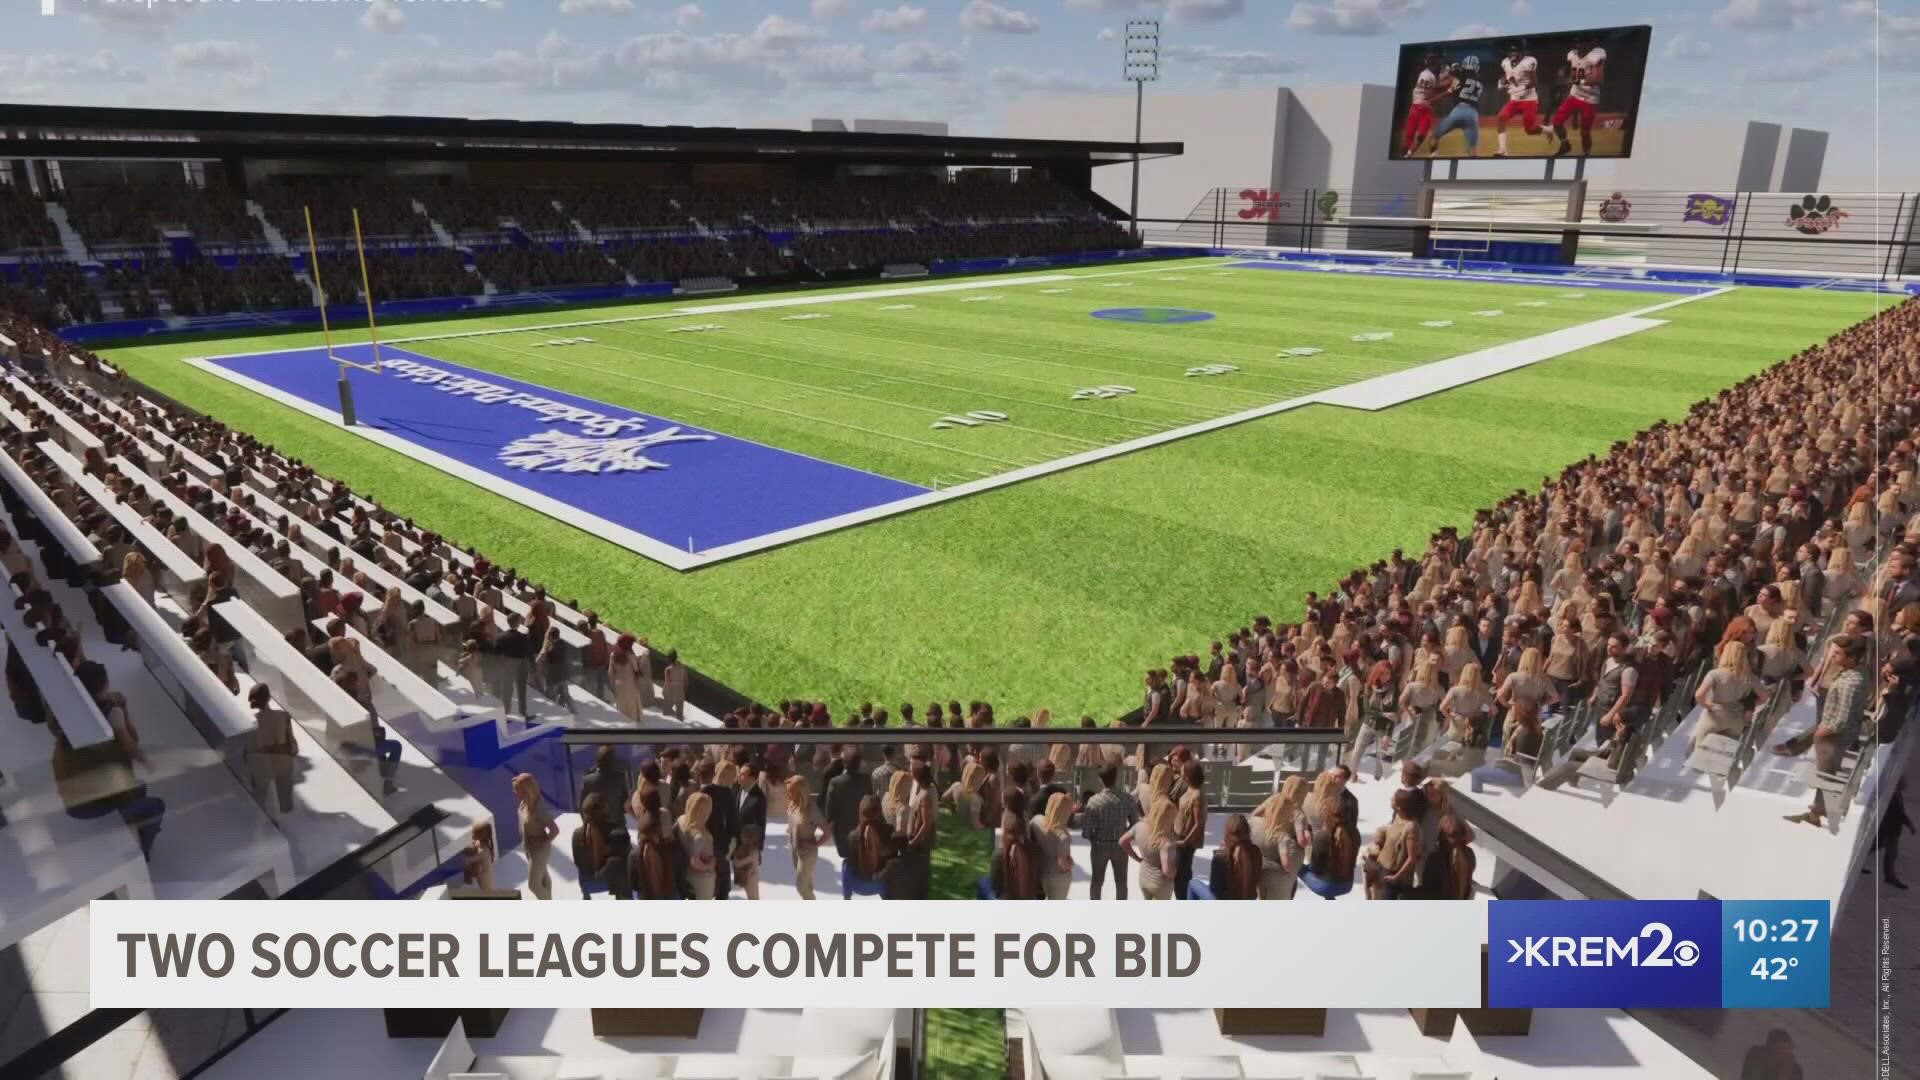 Spokane will be getting its own professional soccer team. The question is: which league will get to establish a team in the city?